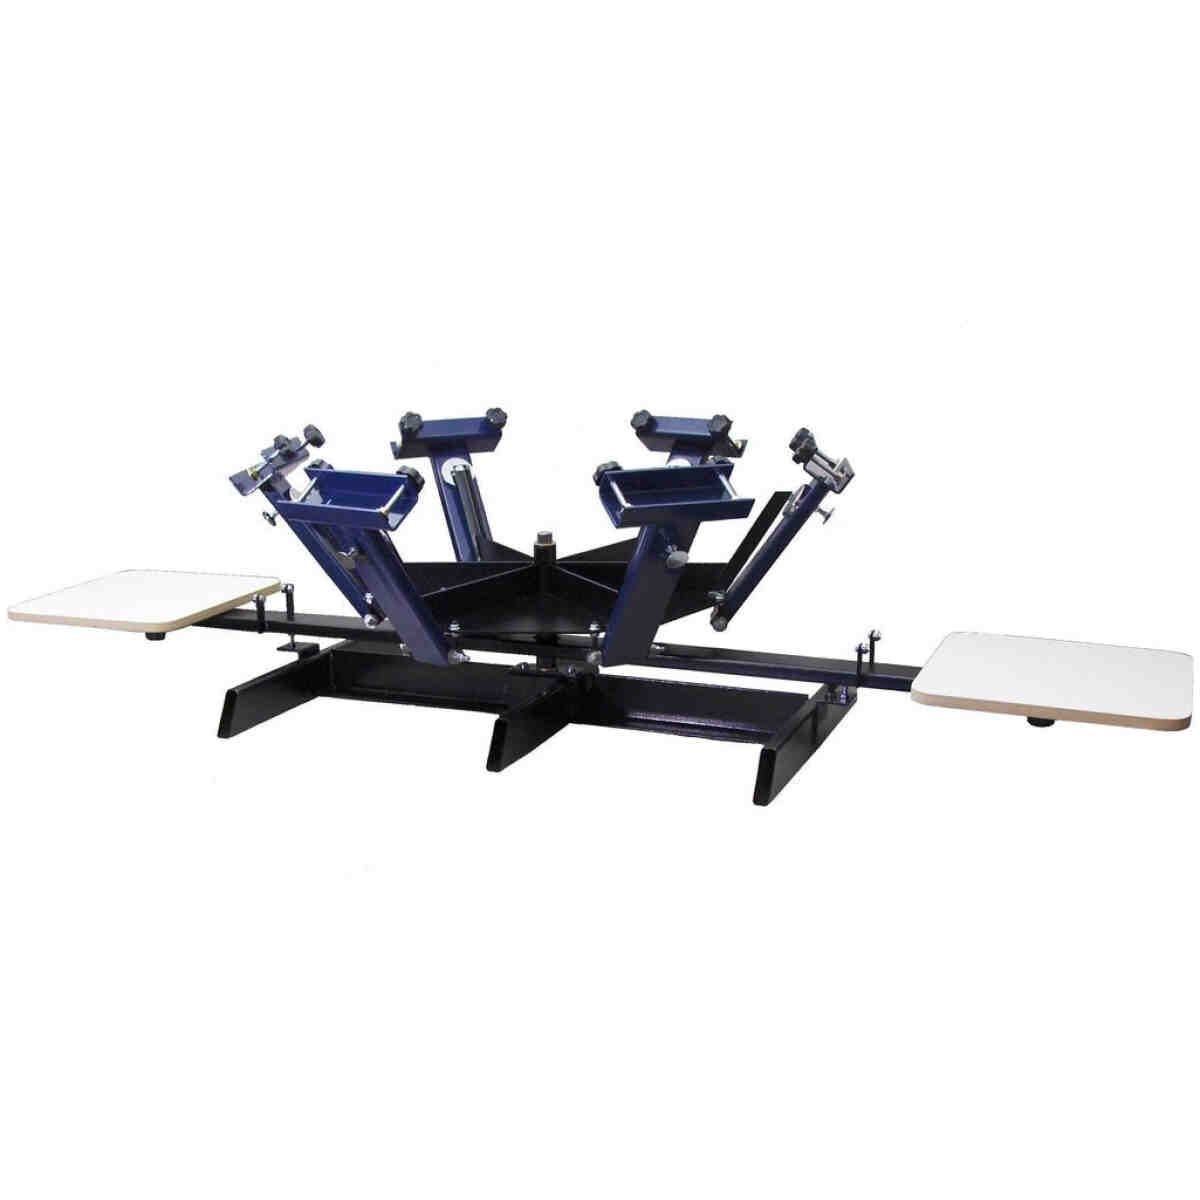 Logos 6 Color 2 Station Screen Printing Press With Stand LOGOS®